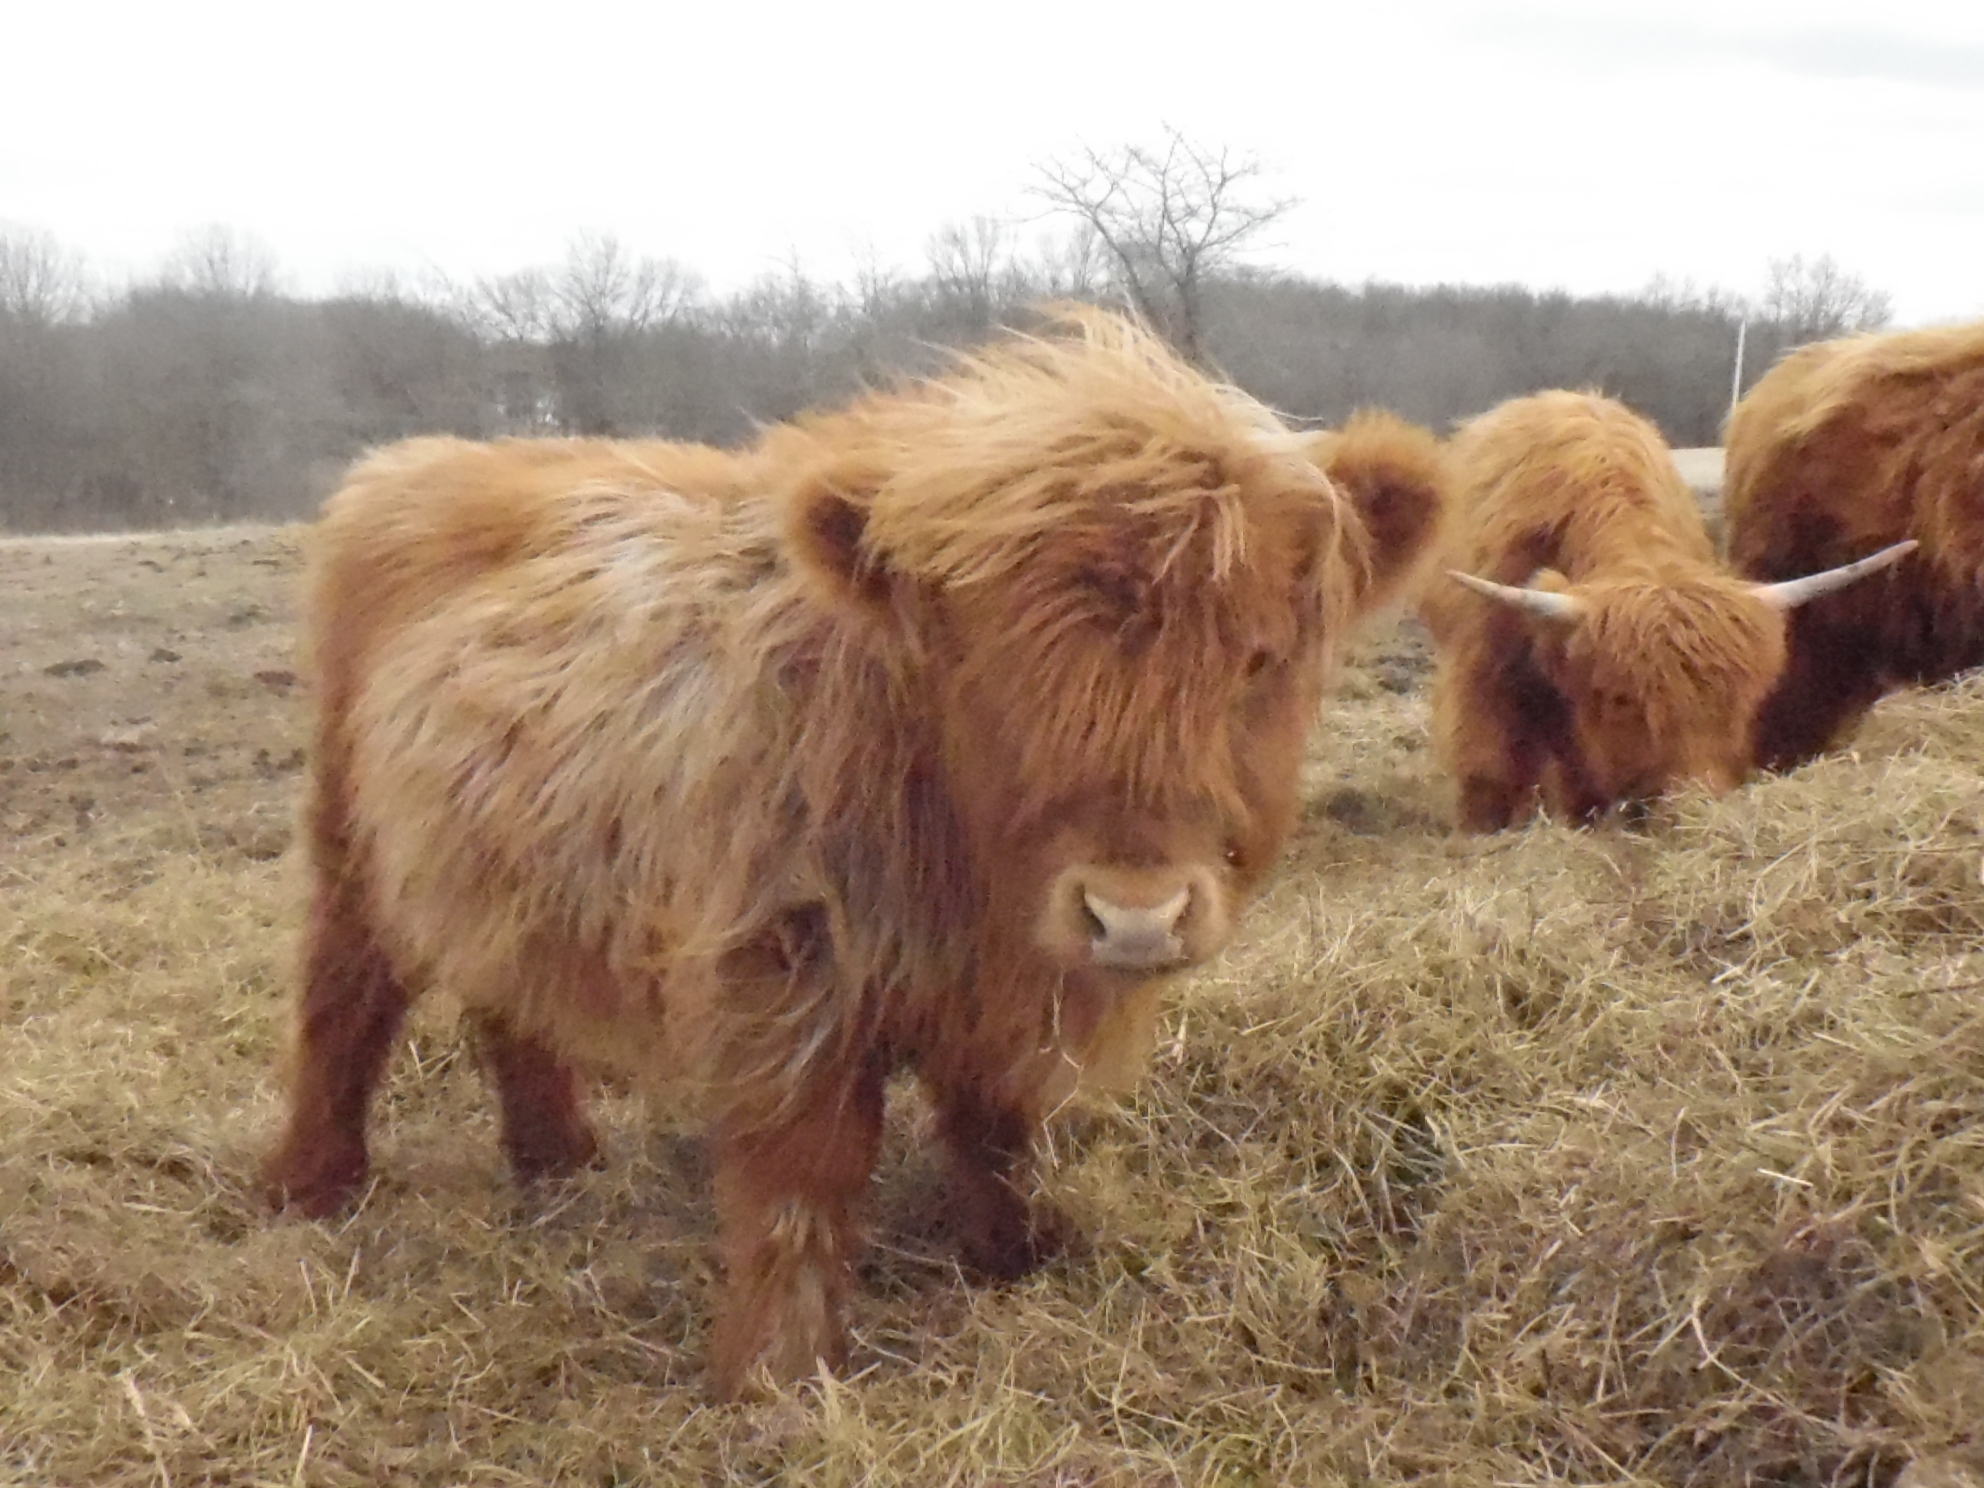 Highland Cattle For Sale